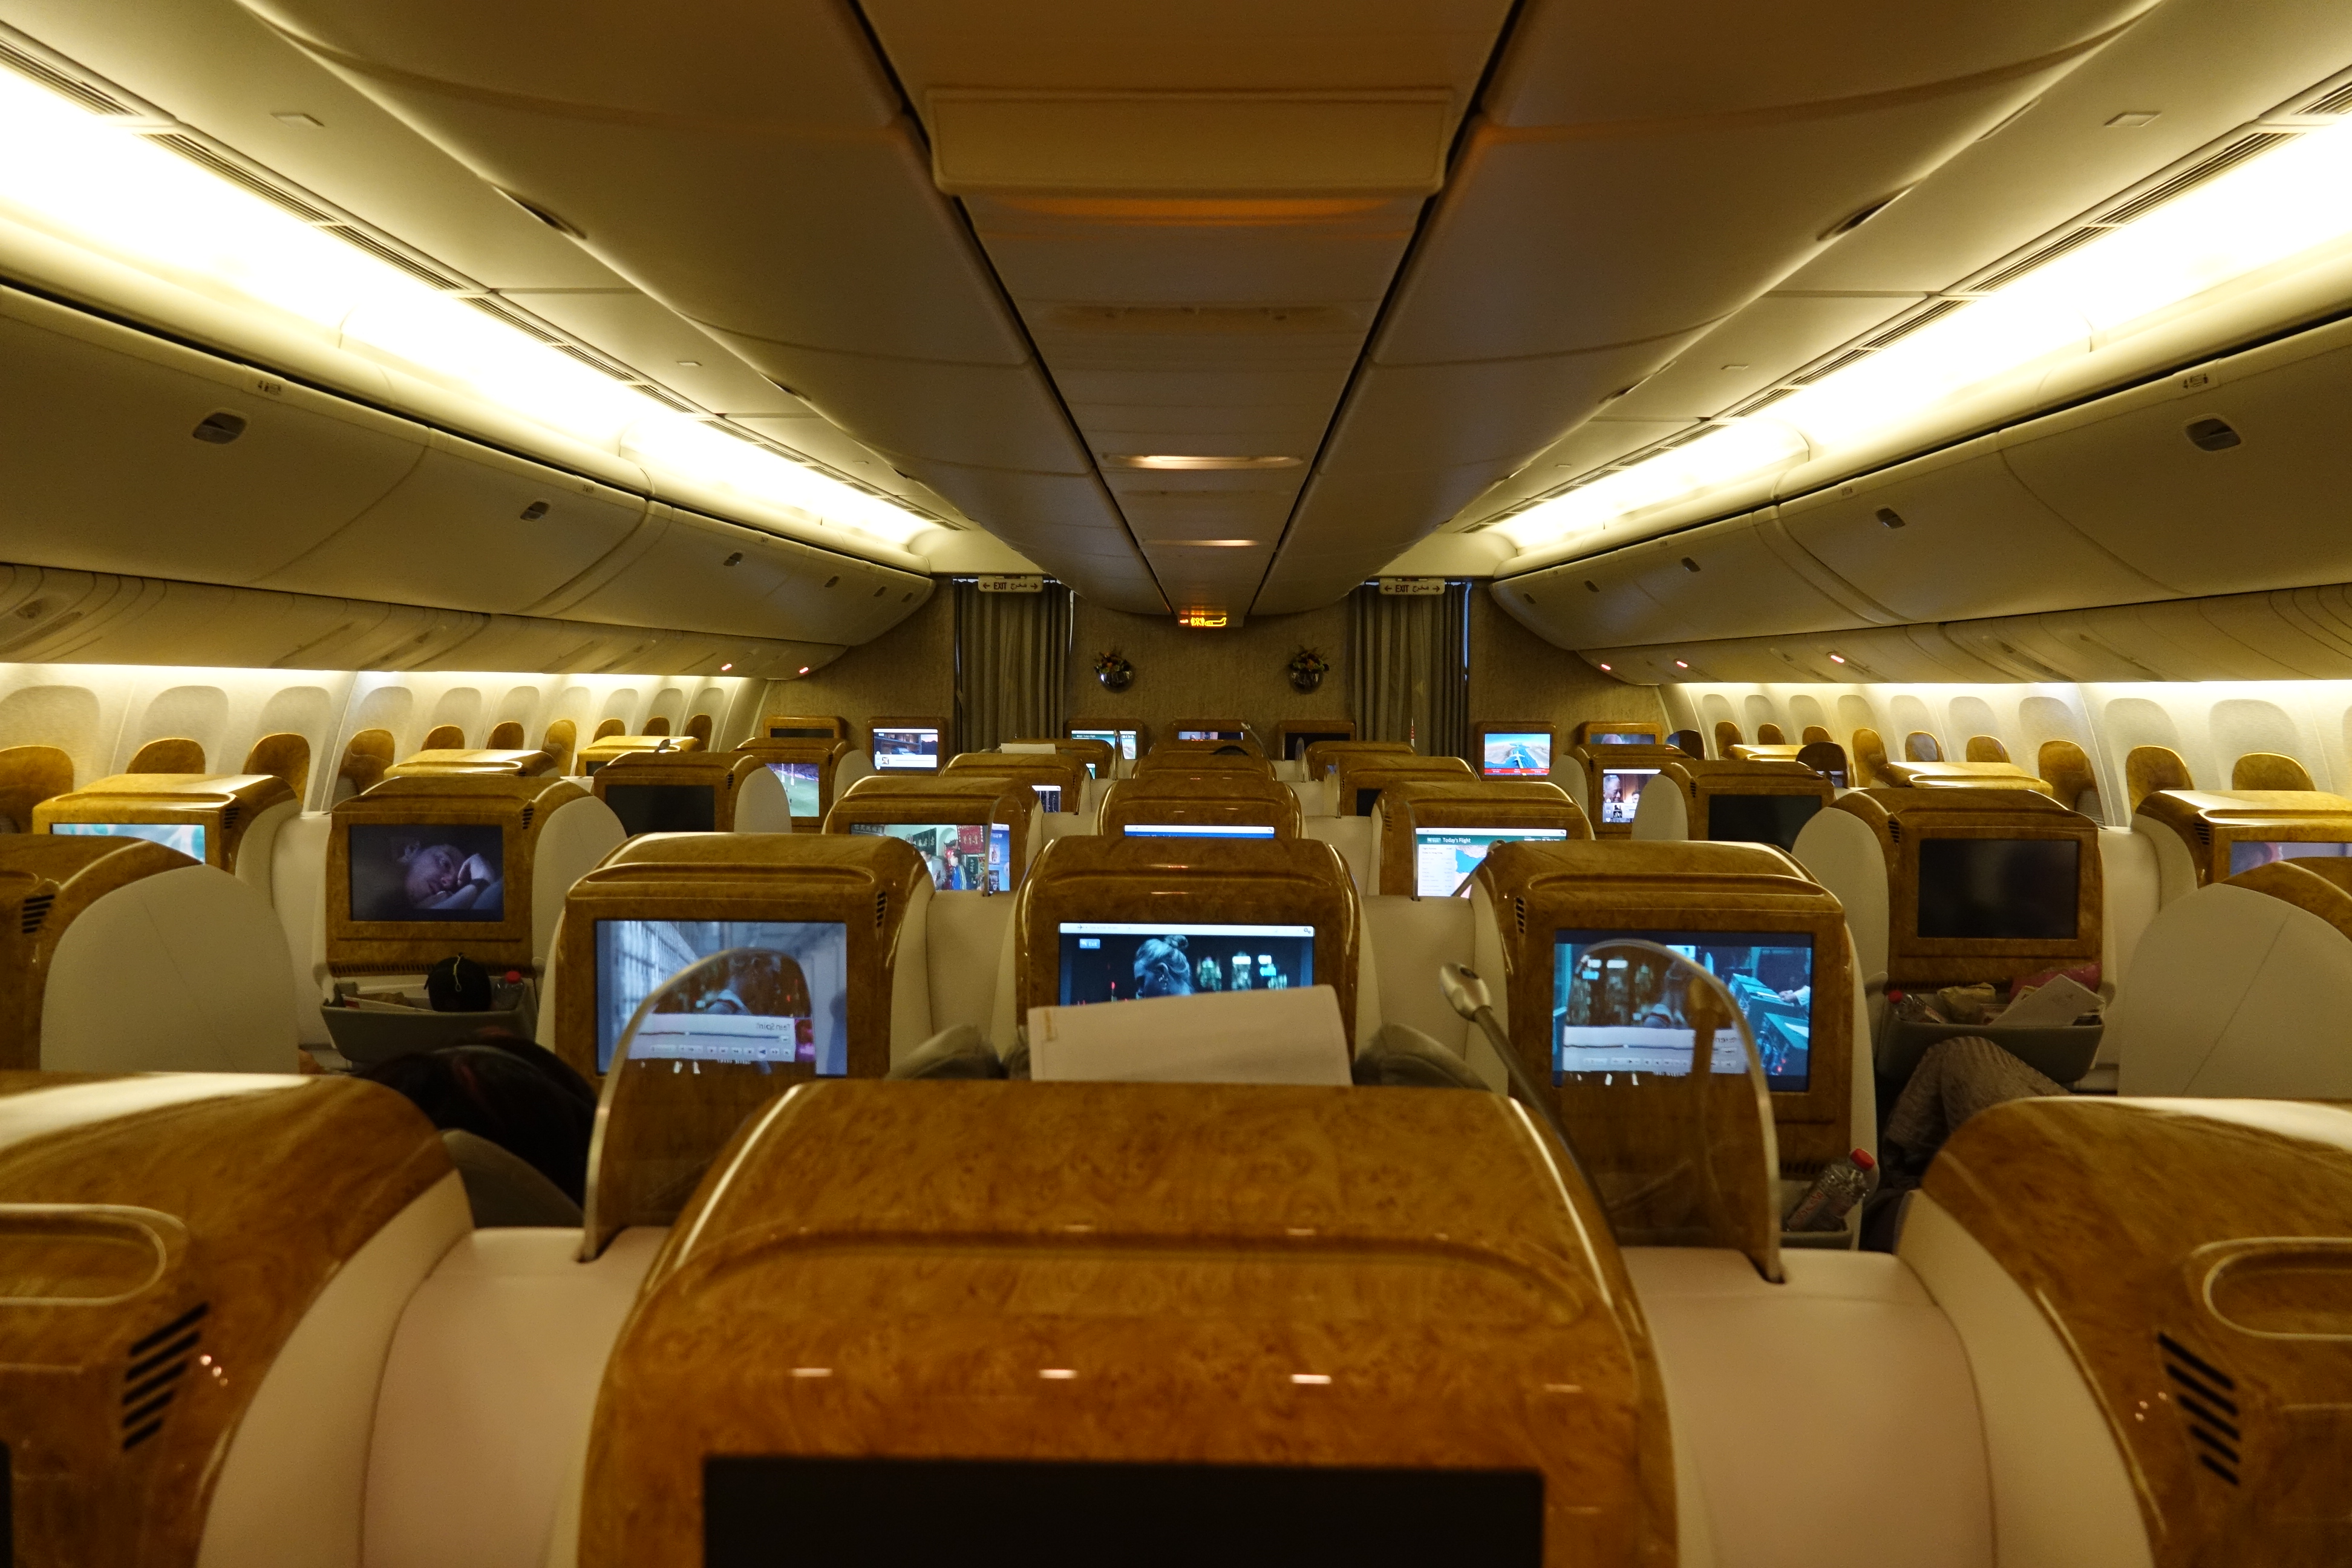 a row of tvs on an airplane